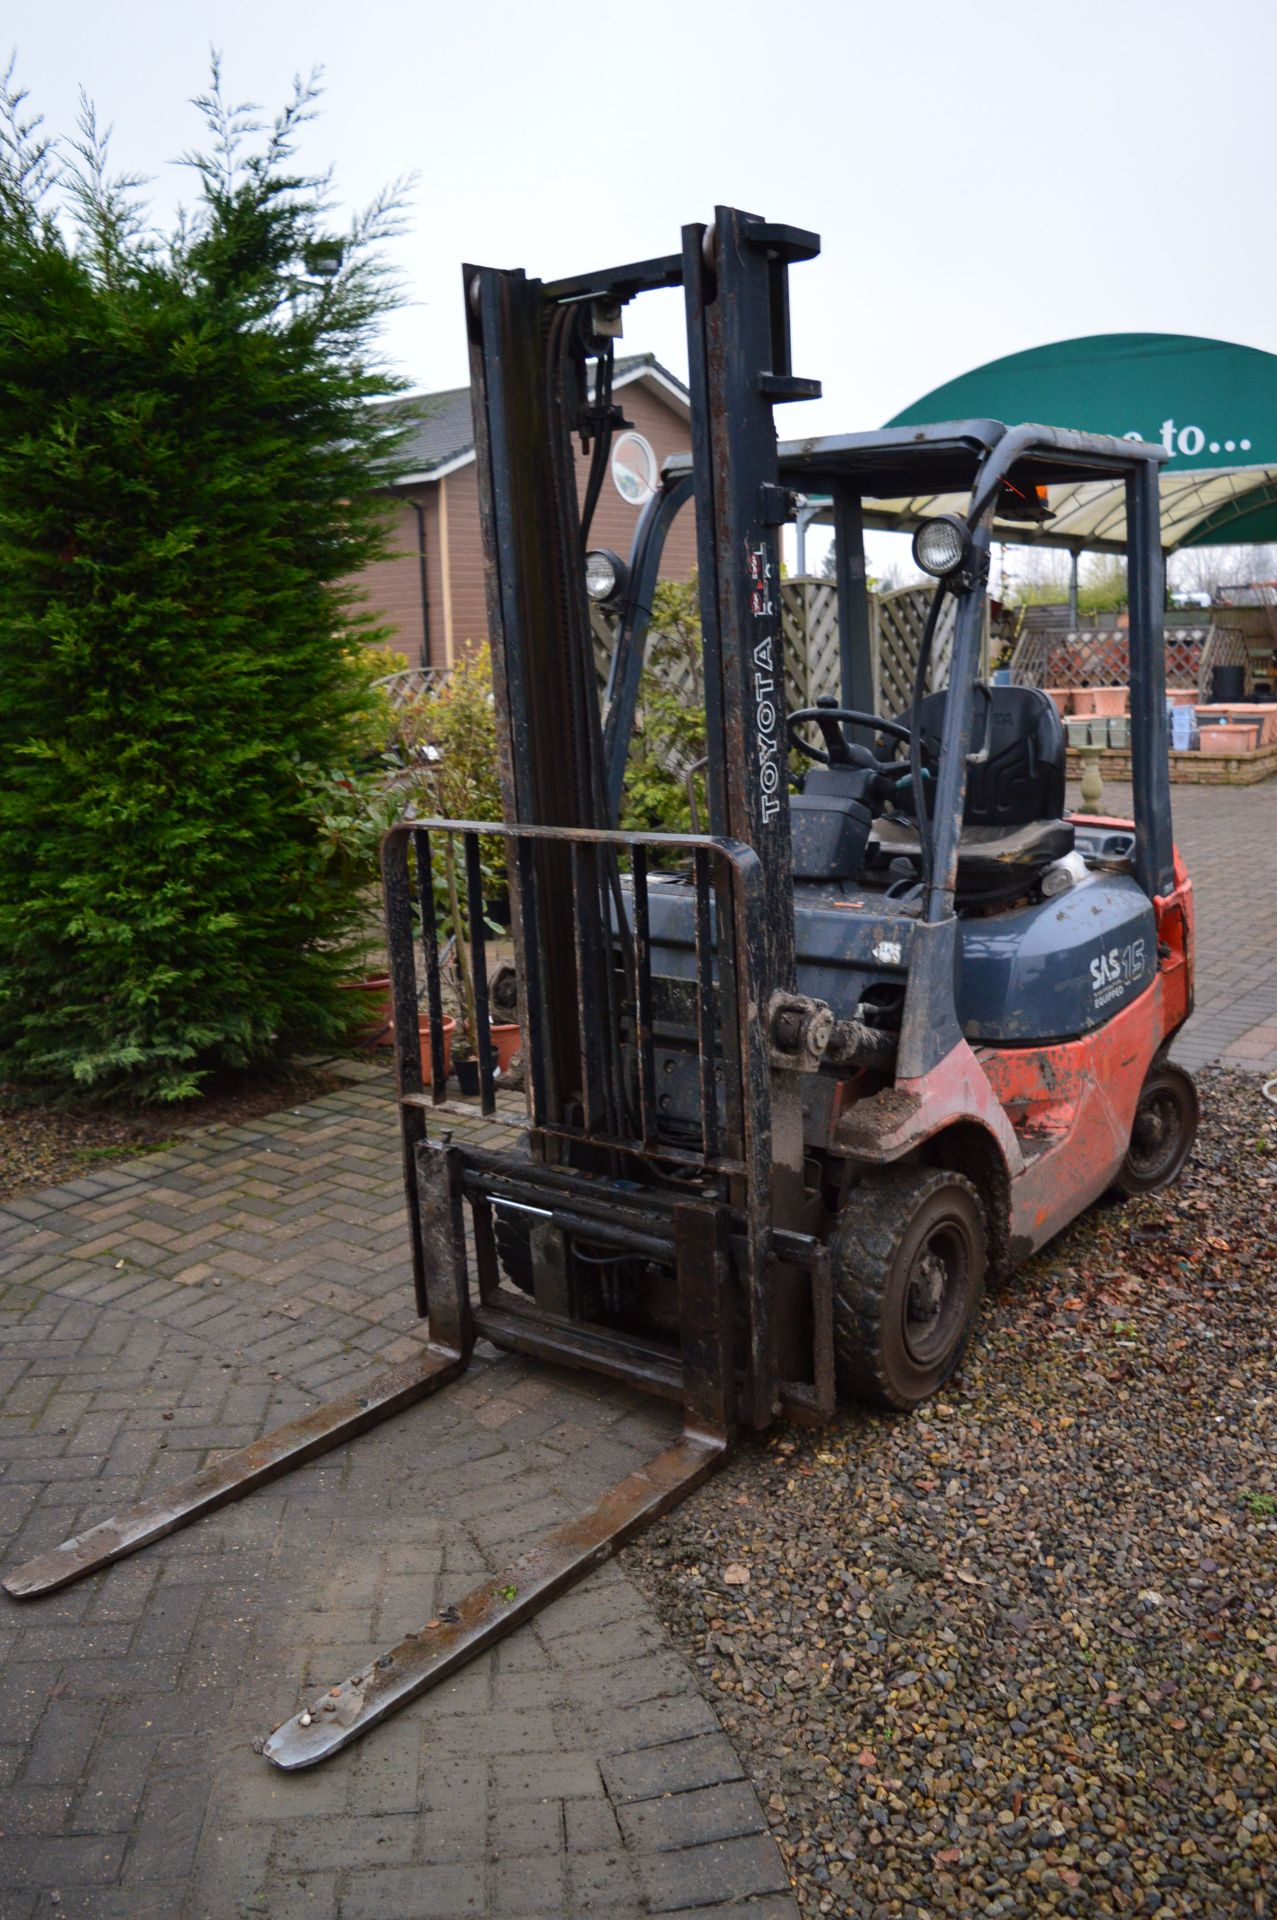 *Toyota 1.5 tonne Diesel Forklift (For Collection Monday 30th)